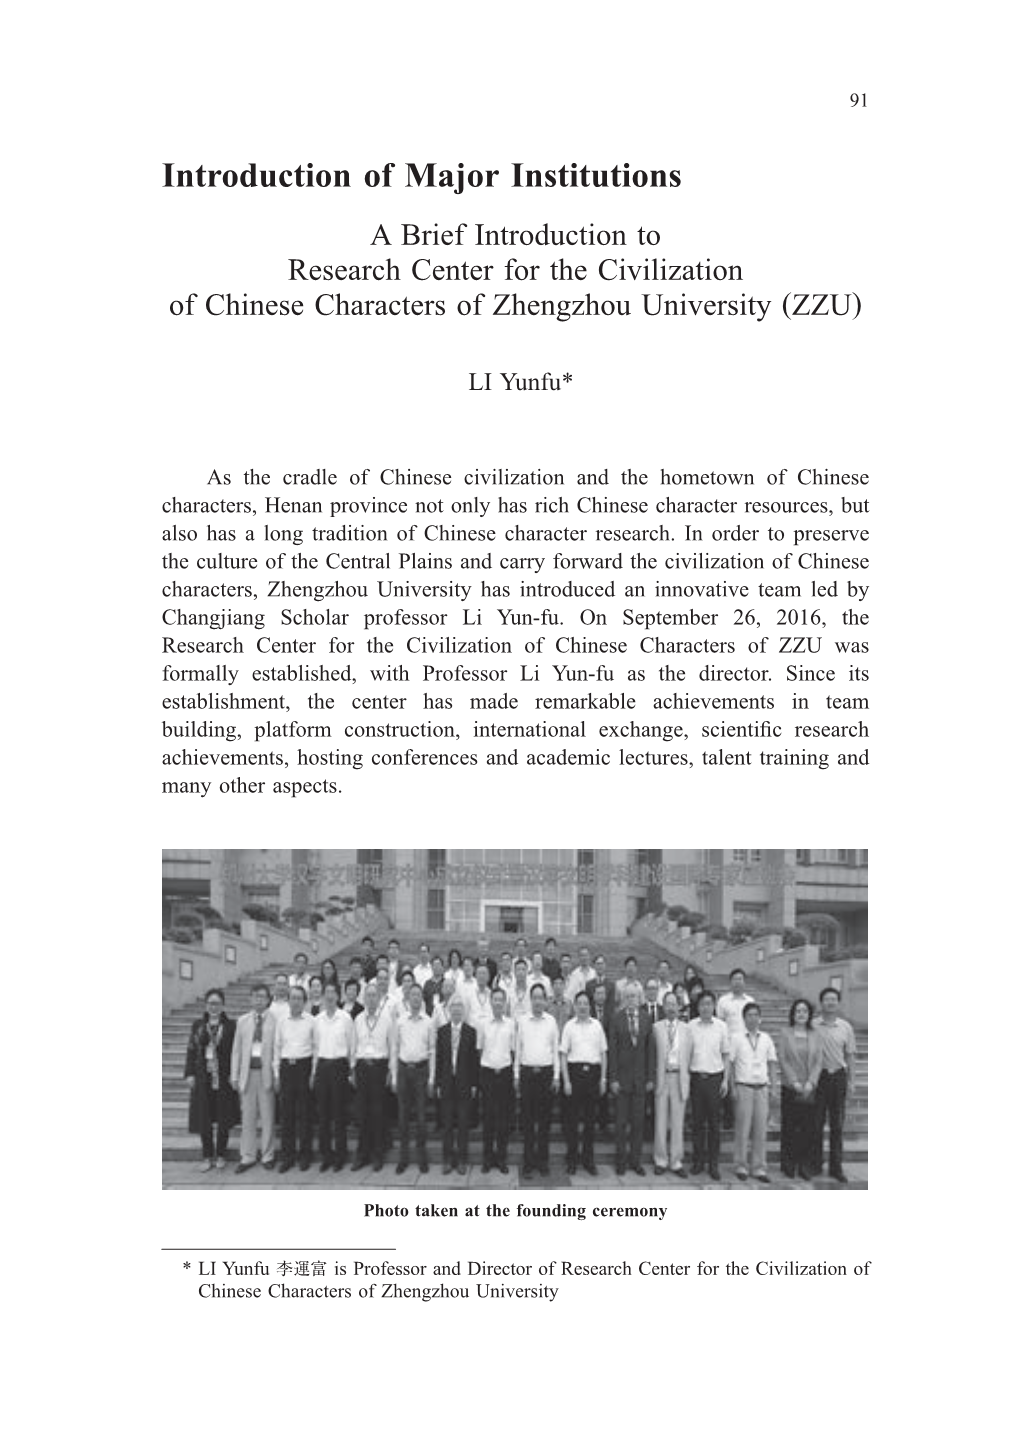 A Brief Introduction to Research Center for the Civilization of Chinese Characters of Zhengzhou University (ZZU)